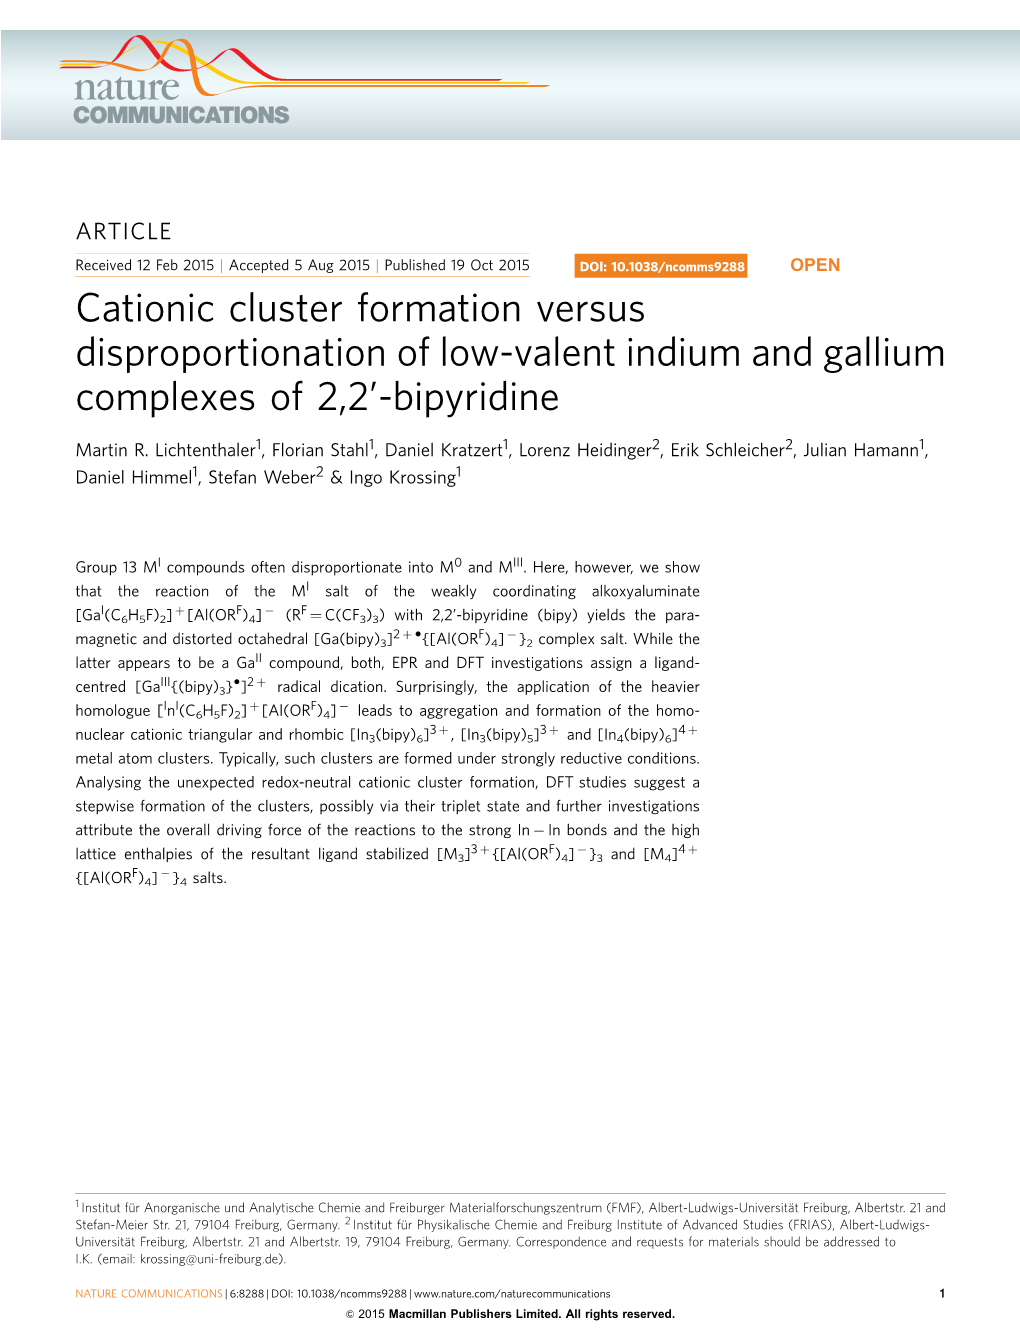 Cationic Cluster Formation Versus Disproportionation of Low-Valent Indium and Gallium Complexes of 2,2’-Bipyridine